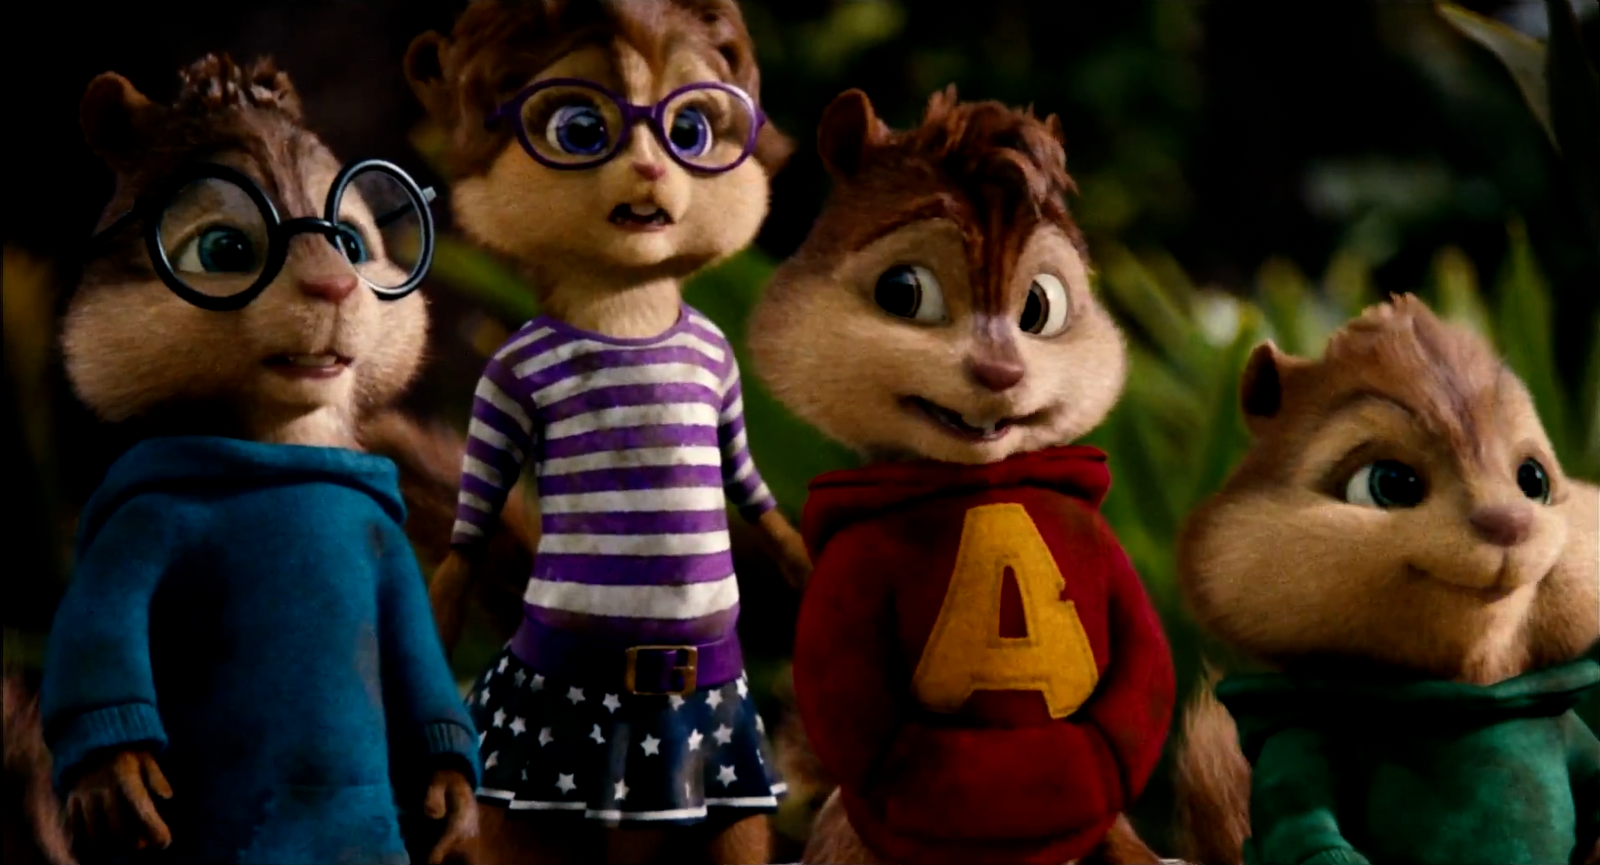  Wallpaper Alvin and the Chipmunks Chipwrecked Movie Wallpapers